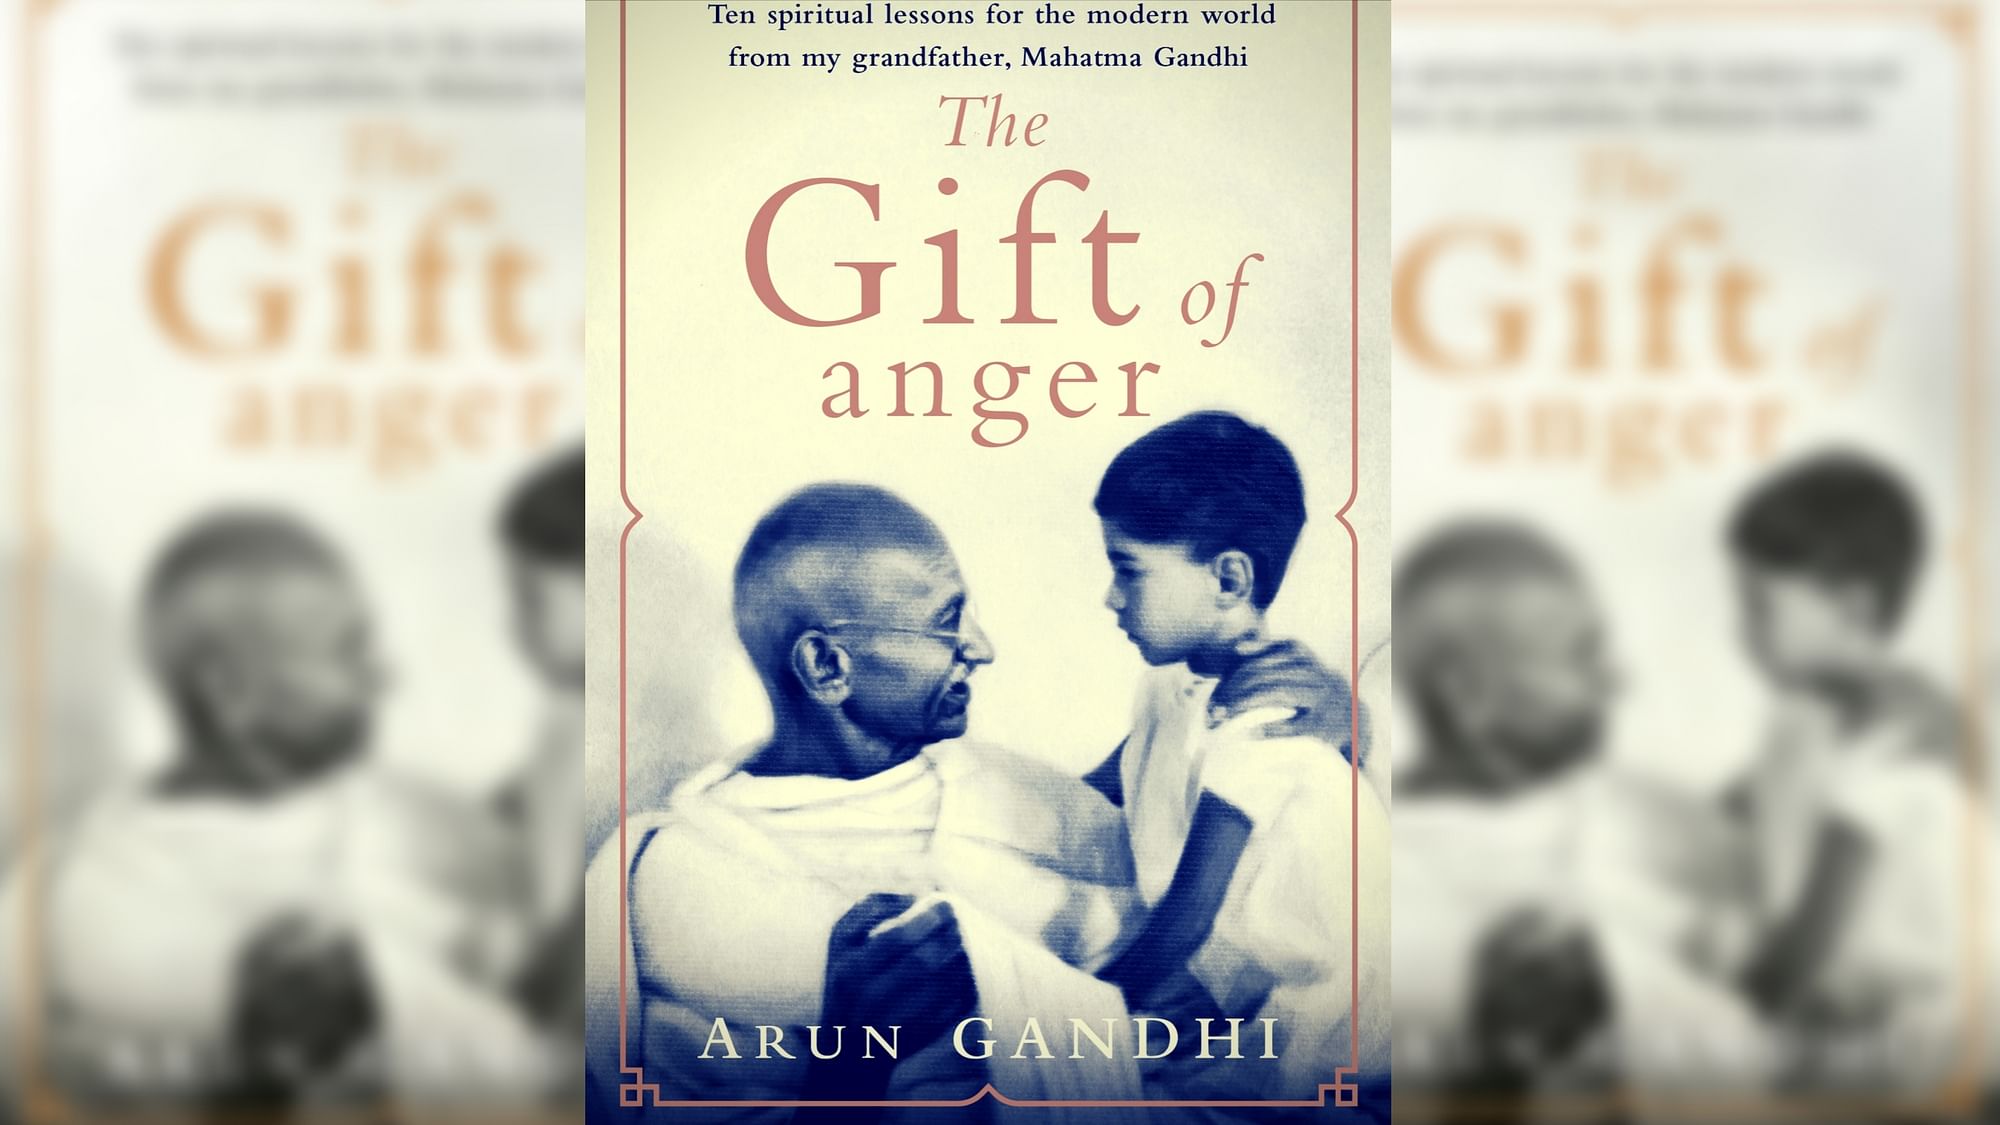 Arun Gandhi writes of the ten lessons he learnt from his grandfather.